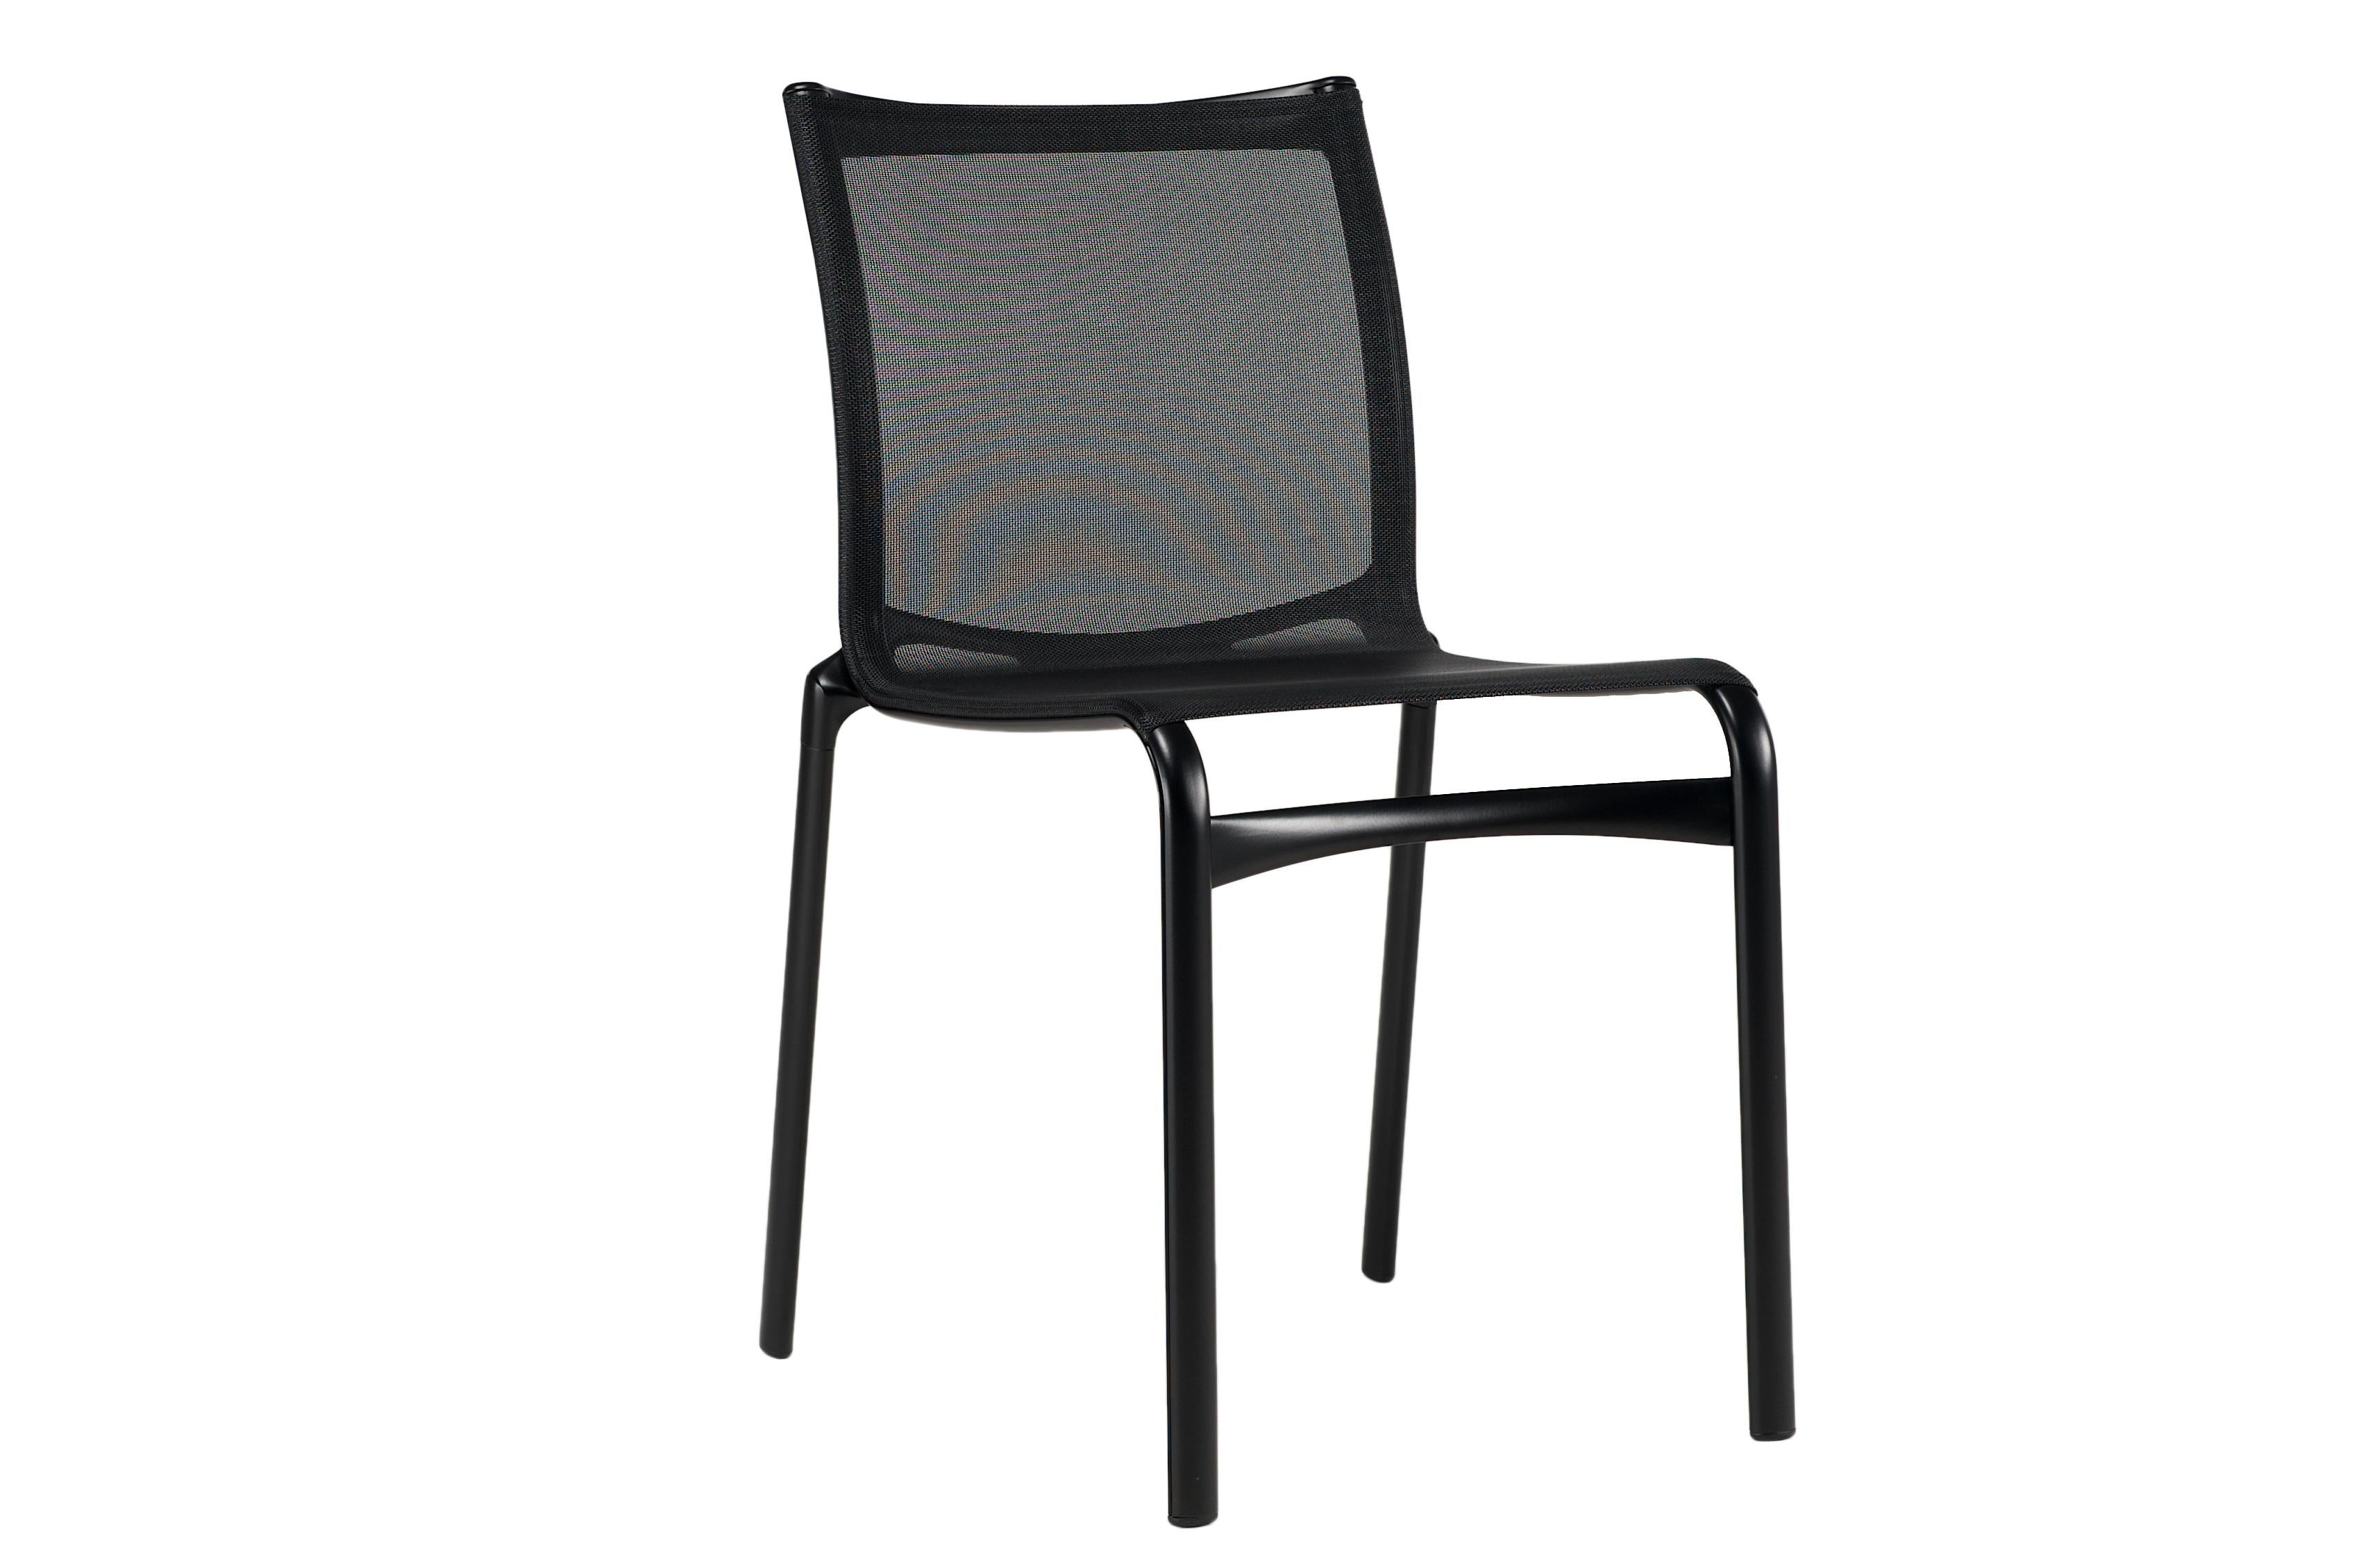 Alias Bigframe 44 Chair in Black Mesh Seat with Lacquered Aluminium Frame by Alberto Meda

Stacking chair with structure made of extruded aluminium profile and die-cast aluminium elements, seat and back in fire retardant PVC covered polyester mesh